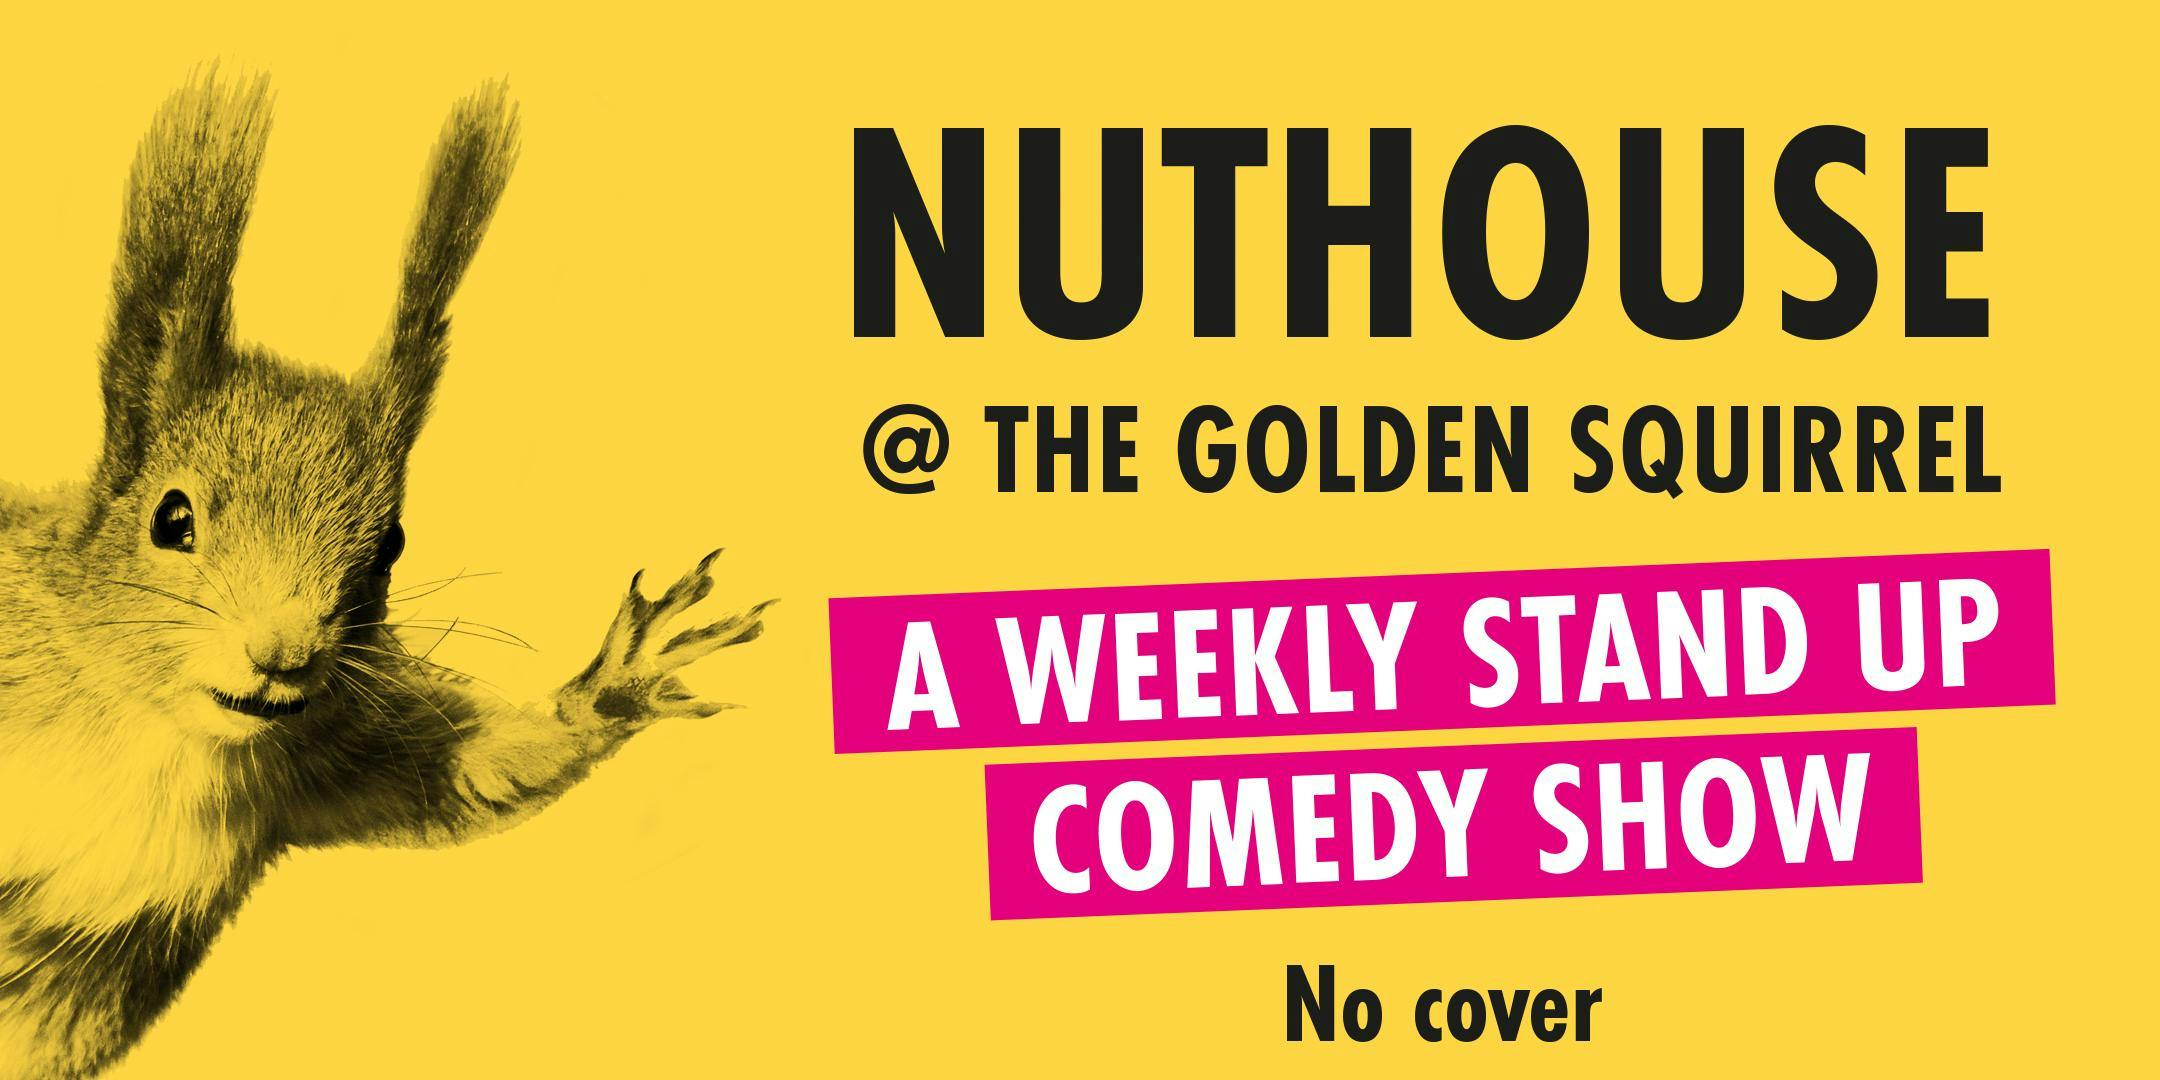 The Nuthouse at The Golden Squirrel